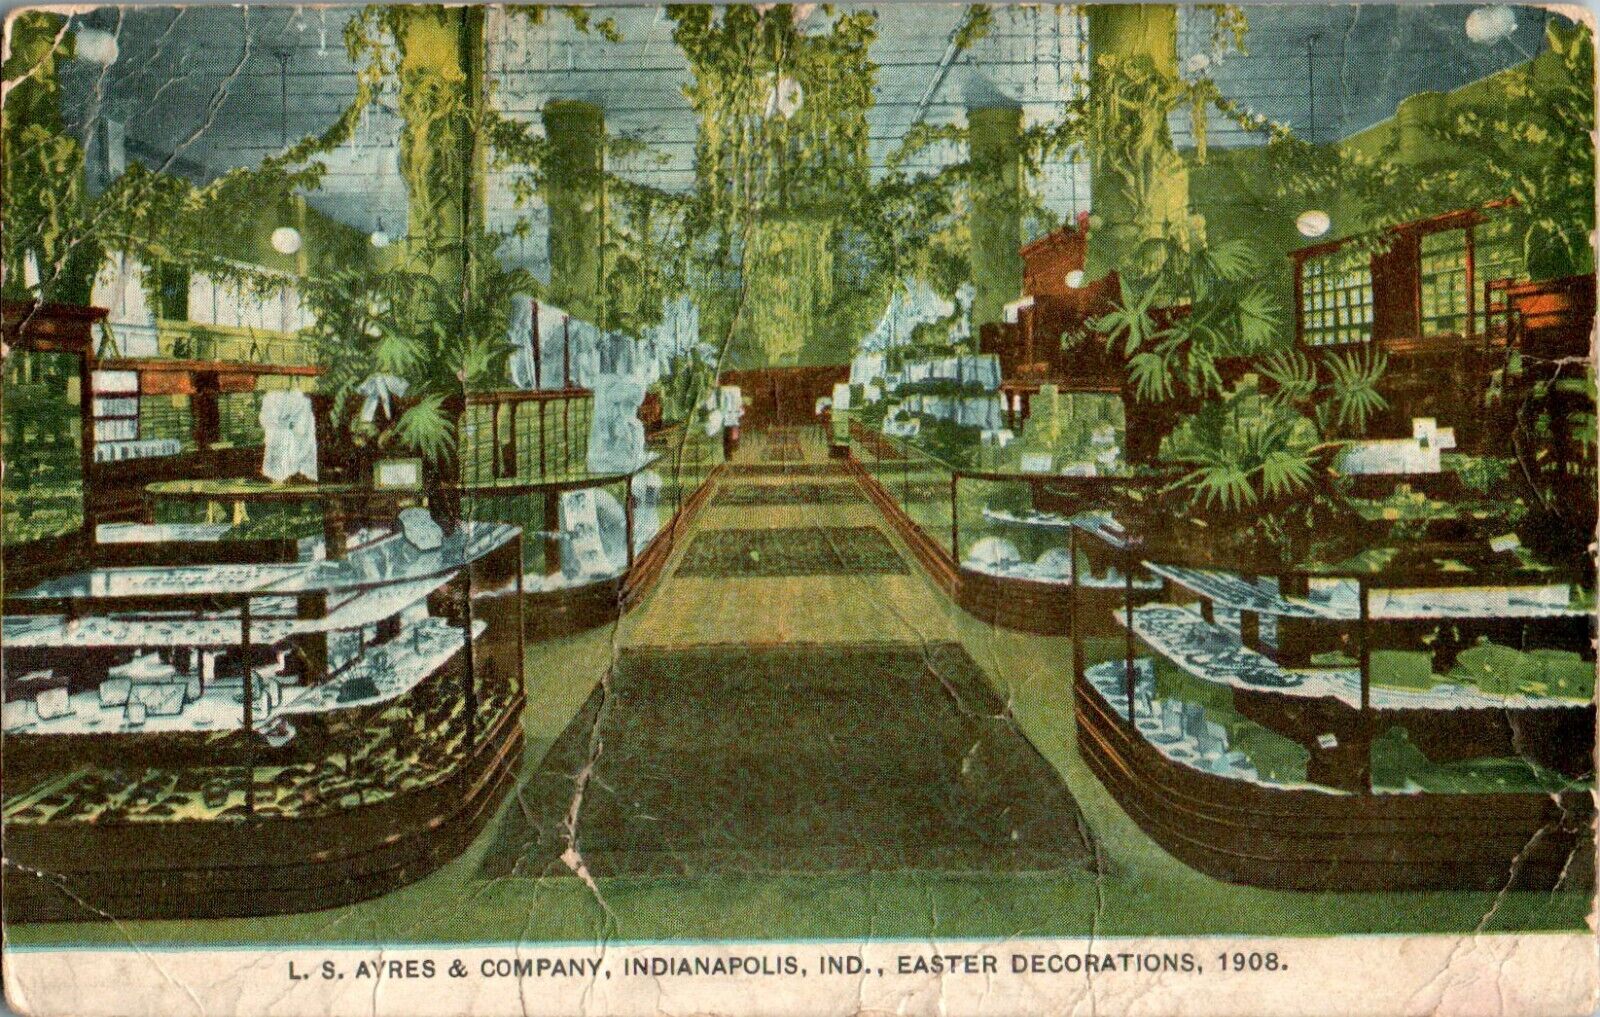 Easter Decorations, L. S. Ayers Department Store, Indianapolis, IN 1908